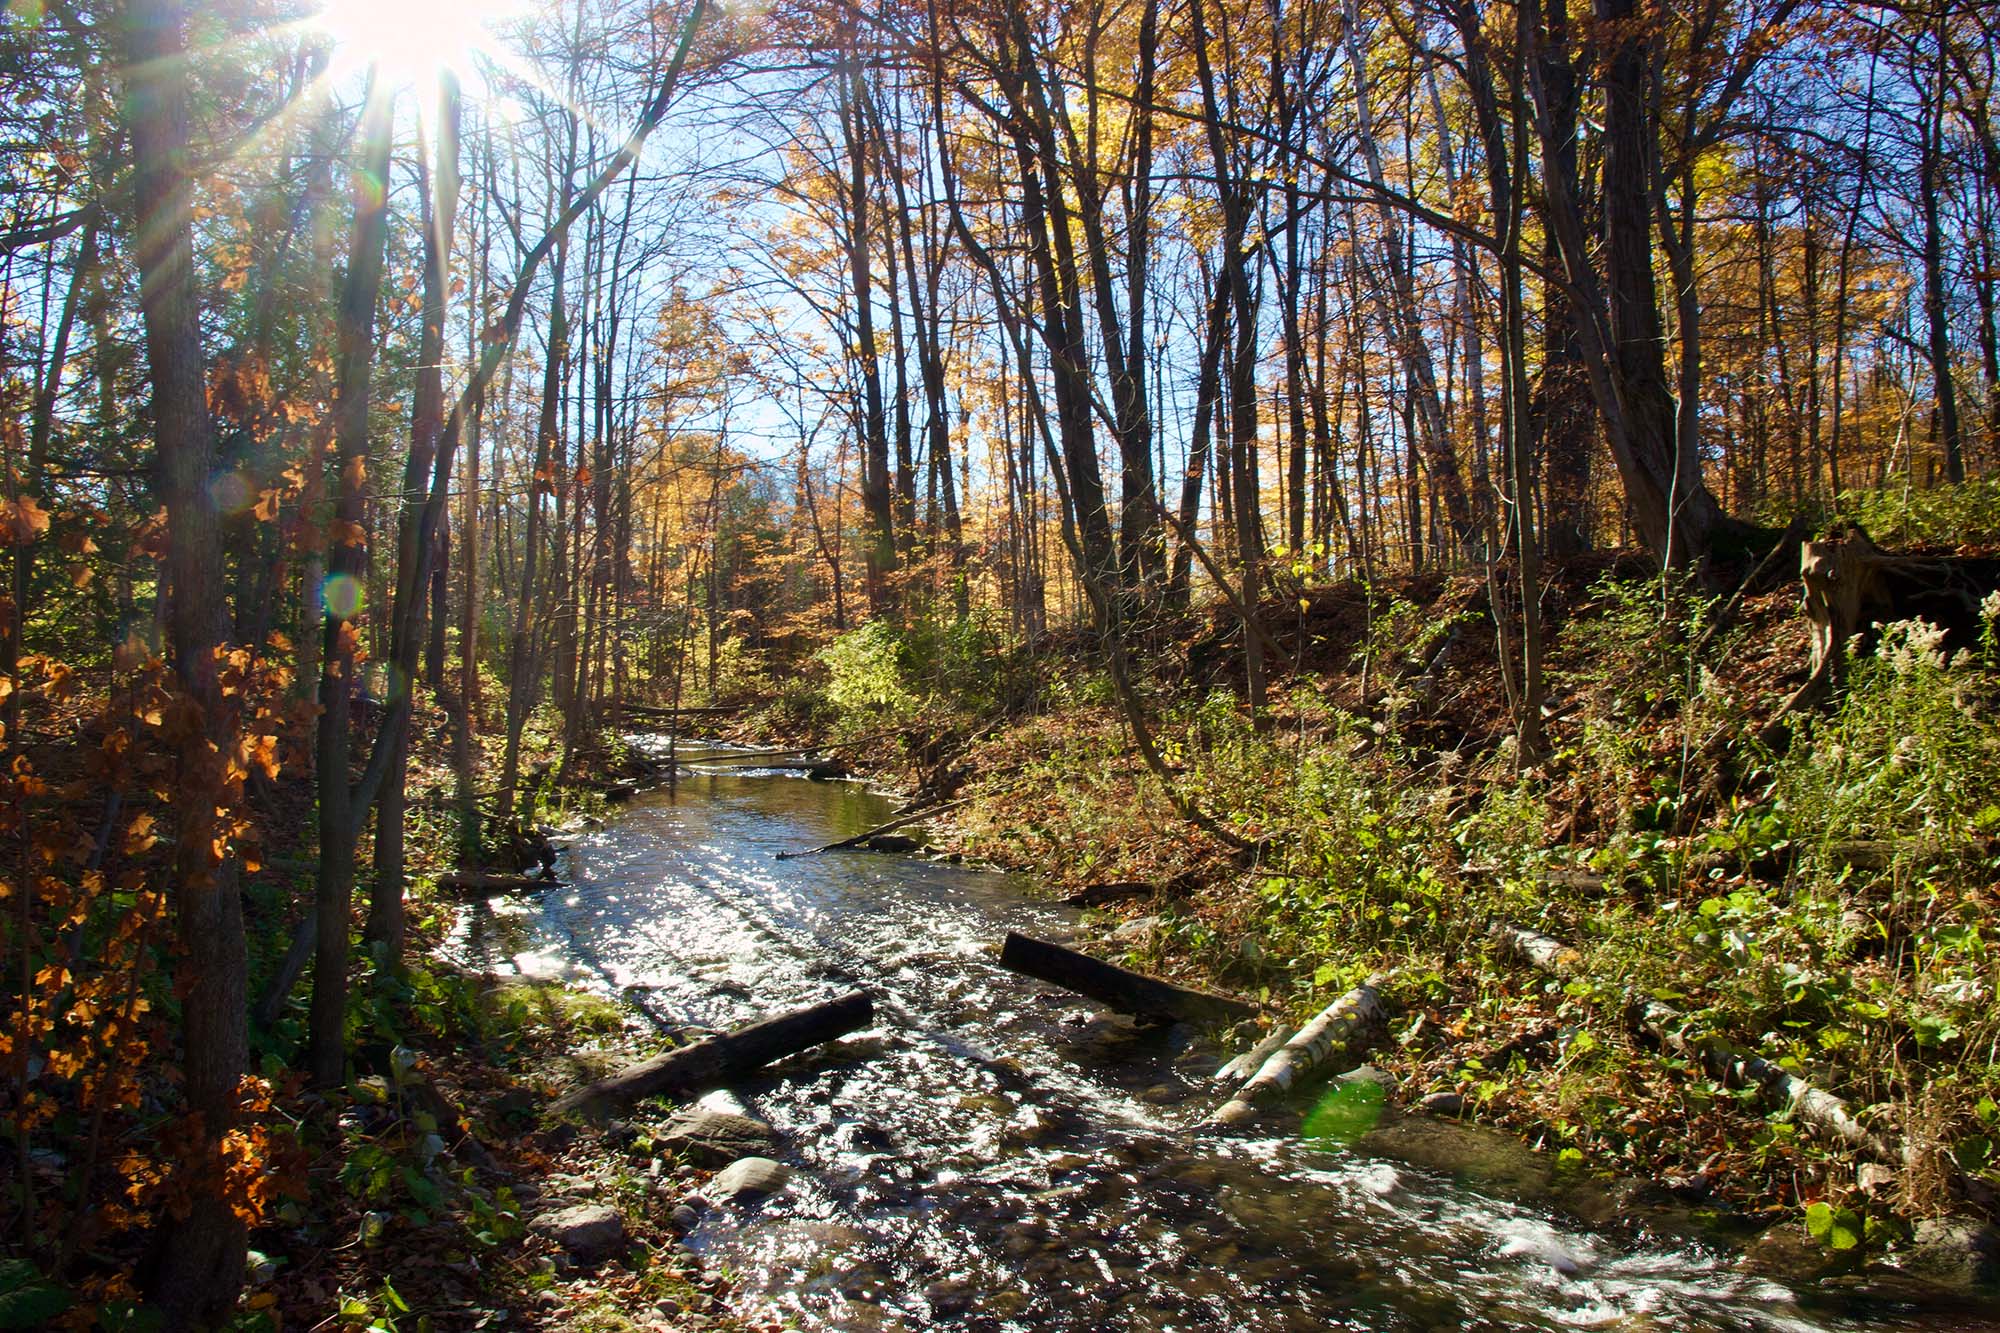 A stream in autumn on a sunny day, with blue skies behind the orange-leaved trees